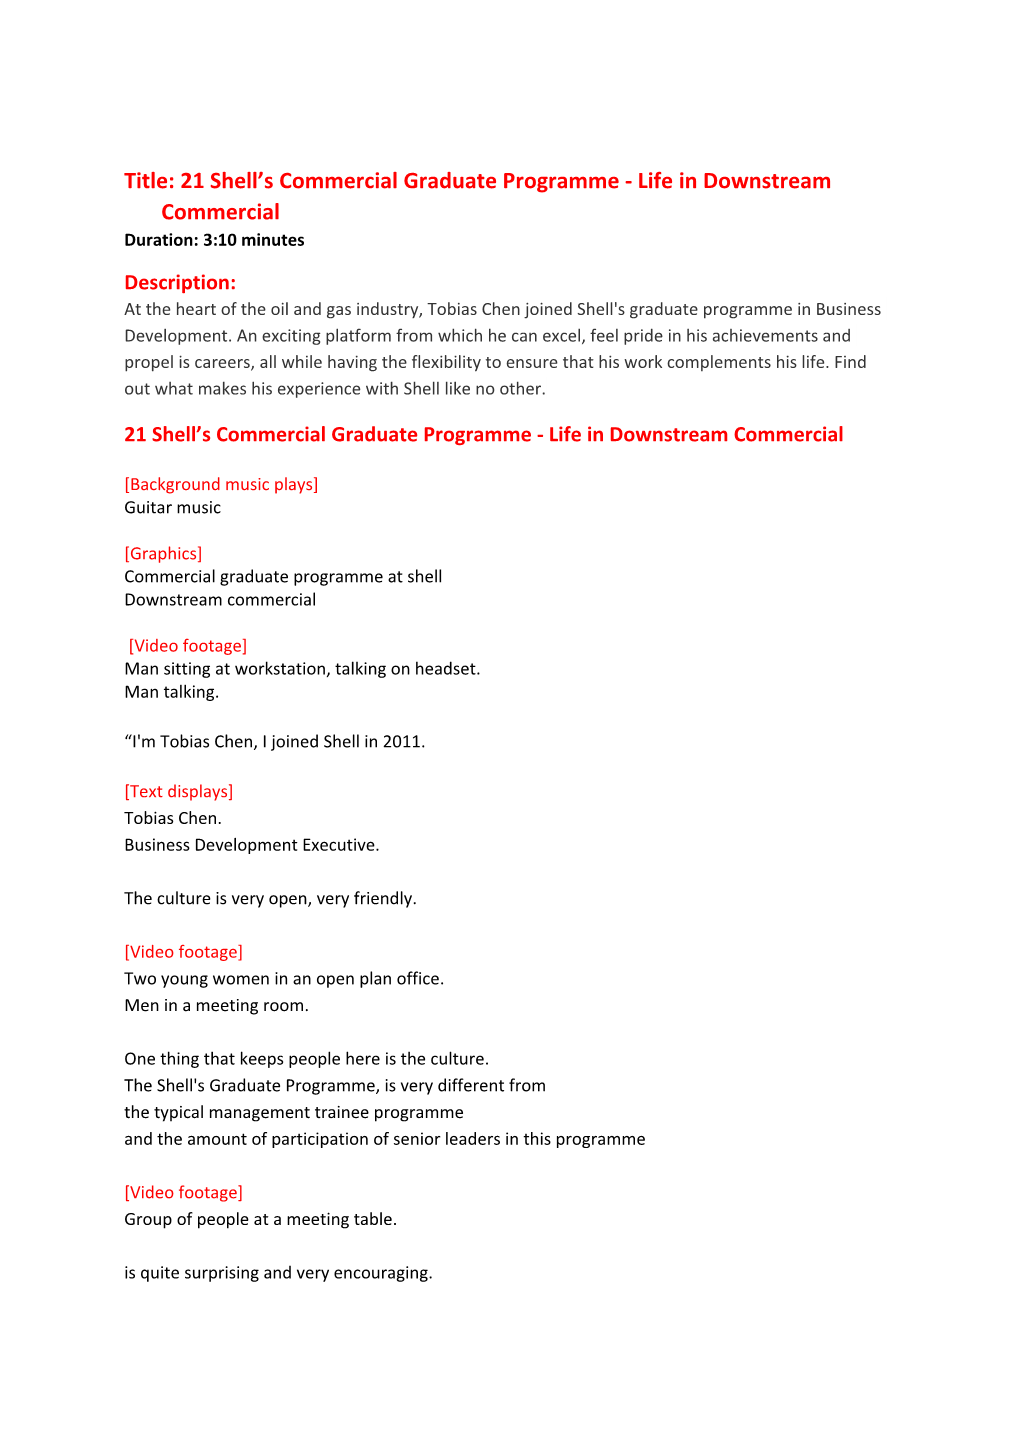 21 Shell's Commercial Graduate Programme - Life in Downstream Commercial